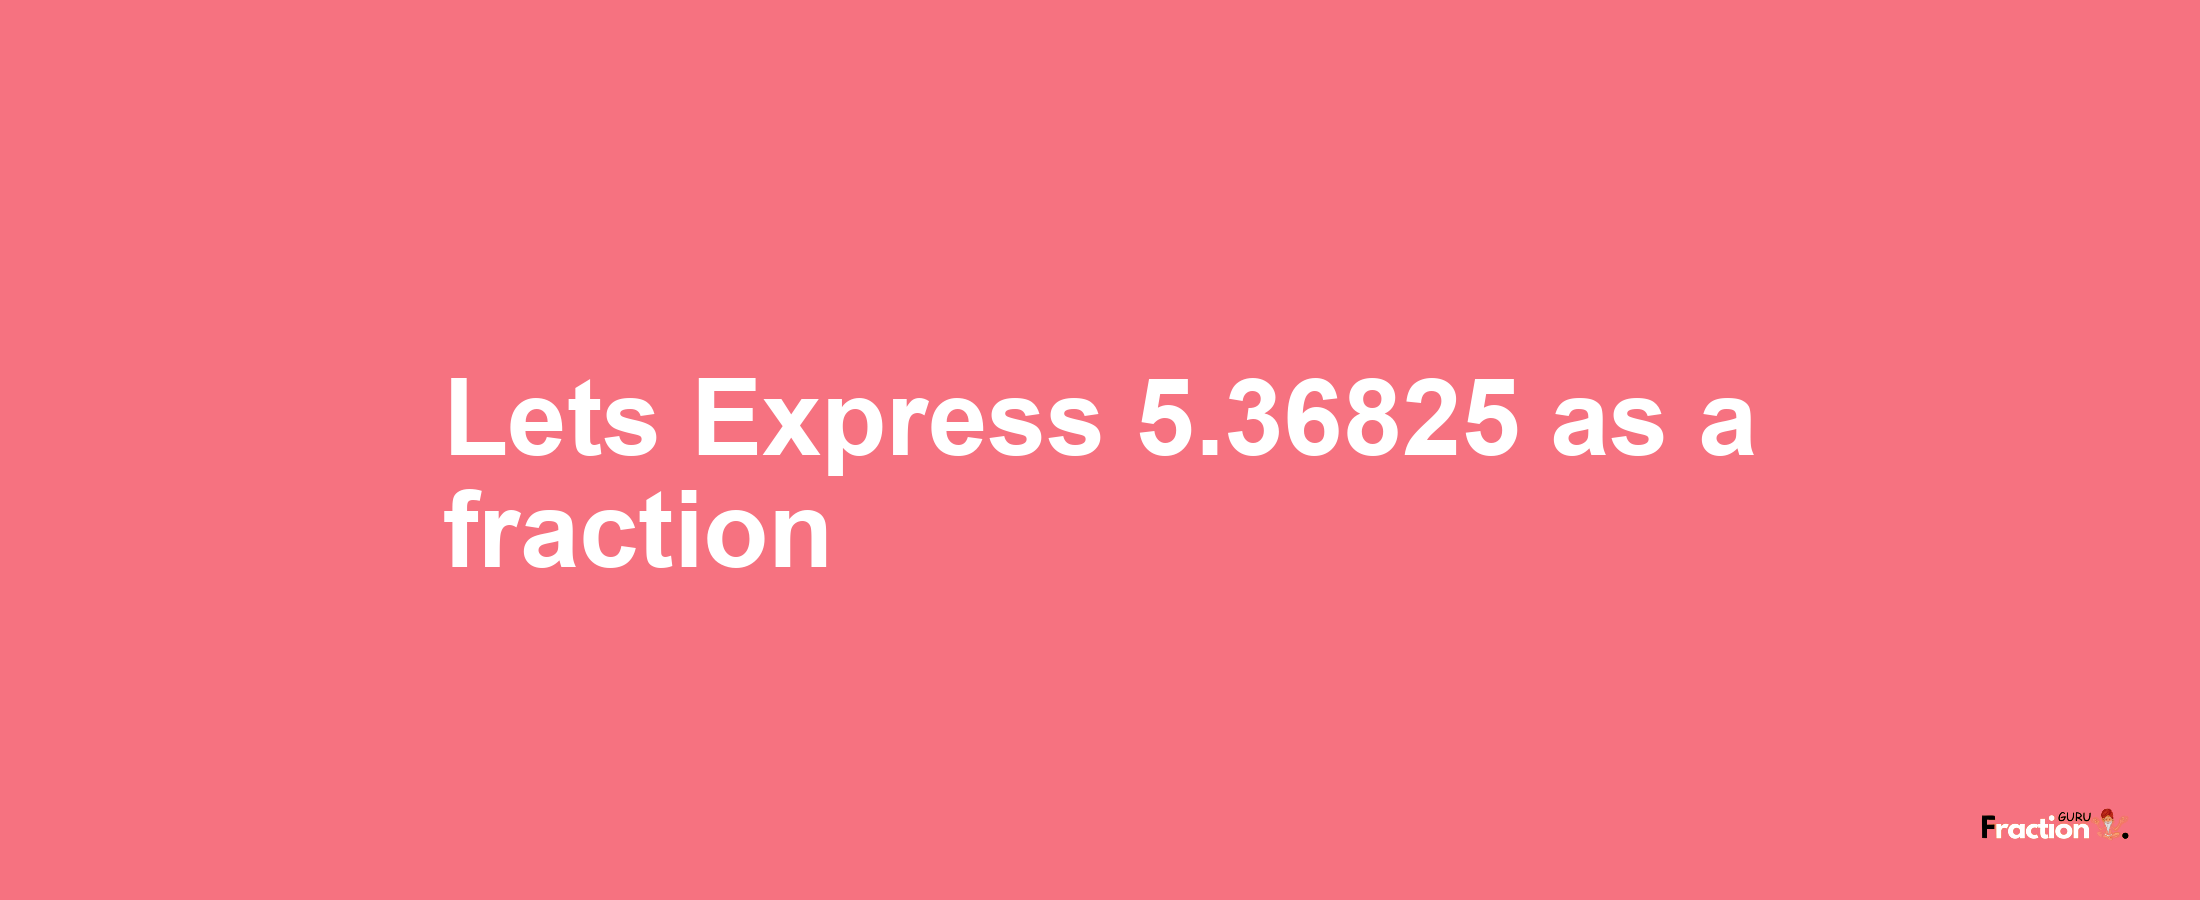 Lets Express 5.36825 as afraction